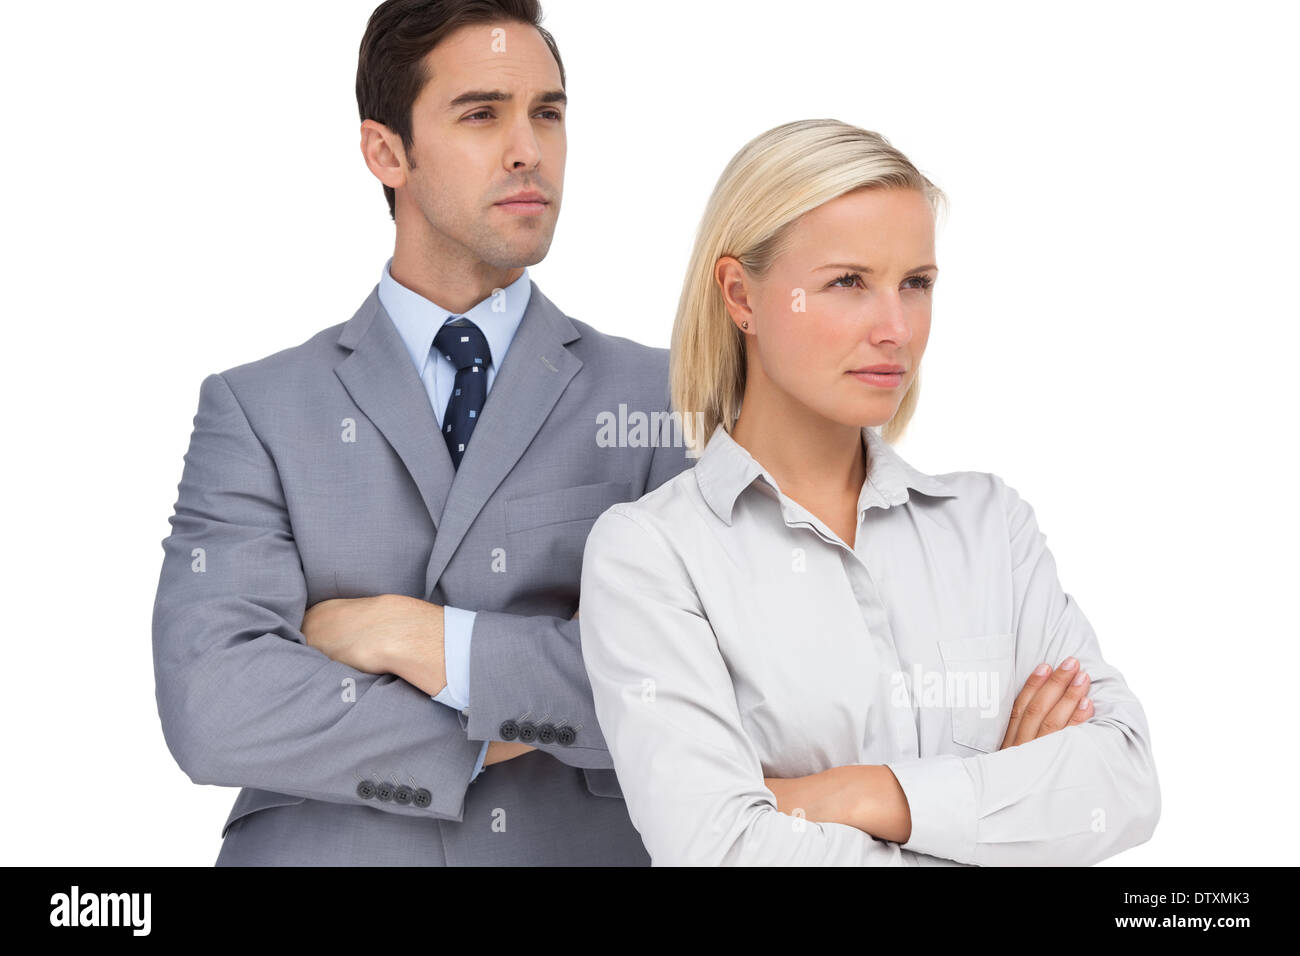 Serious colleagues looking at the same way Stock Photo